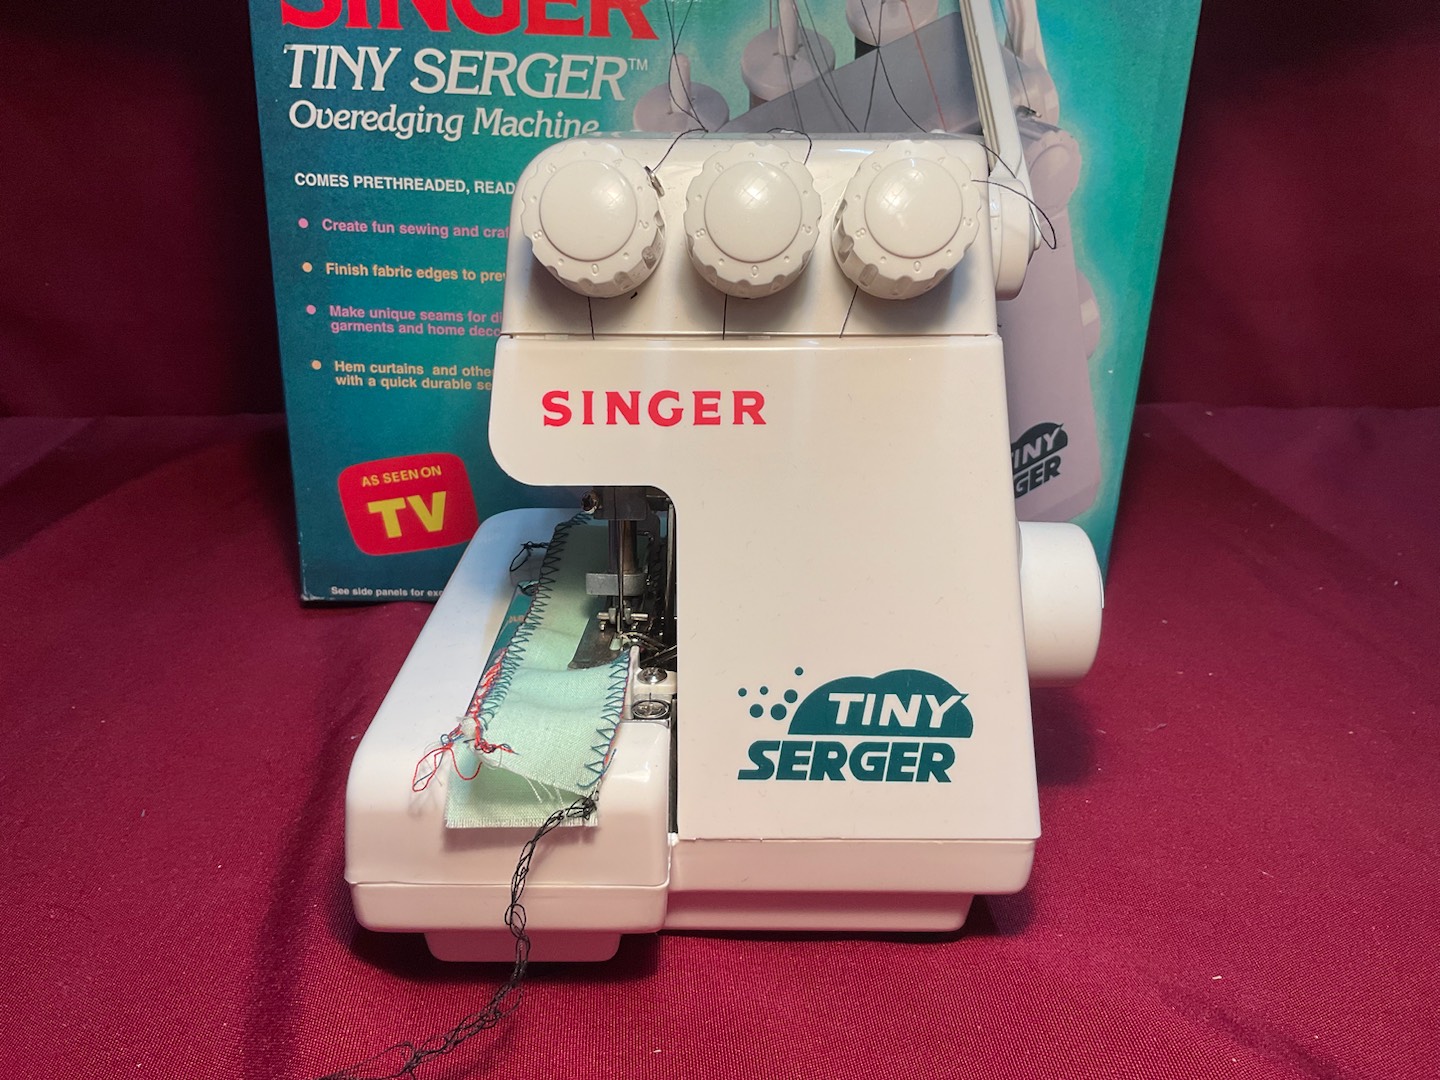 Buy the Singer Tiny Serger Overedging Sewing Machine